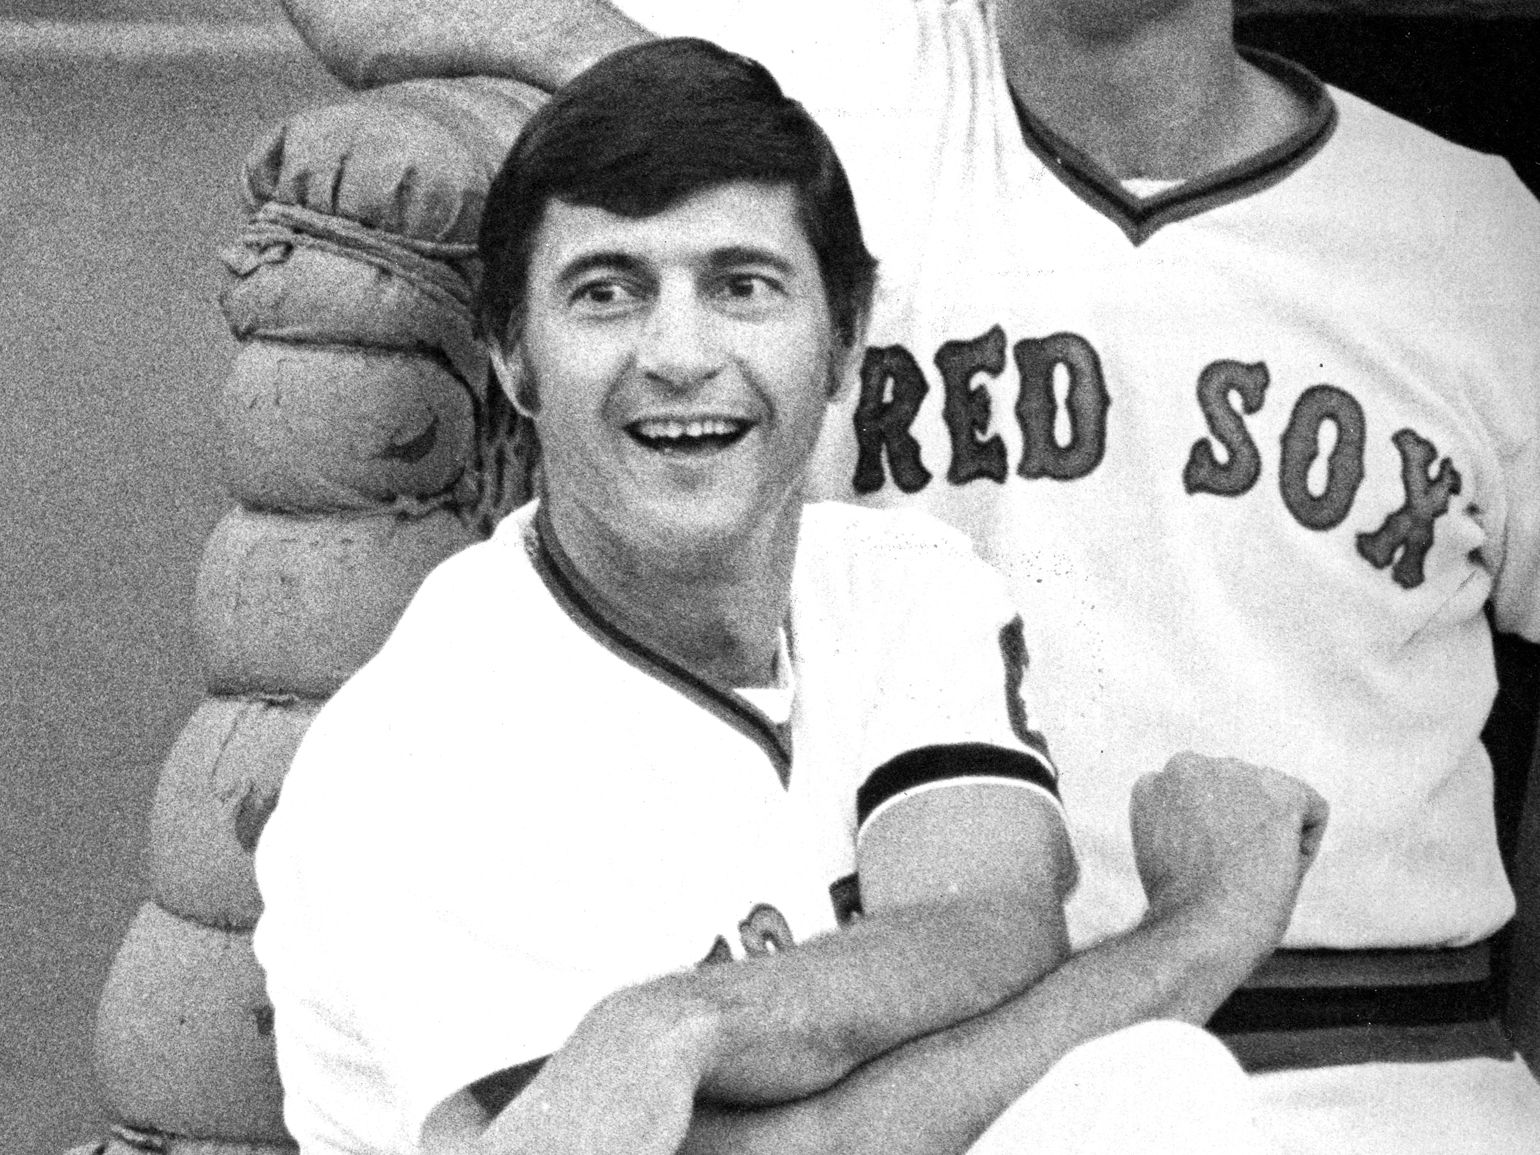 Failures of the 1976 Red Sox left a sour taste in Carl